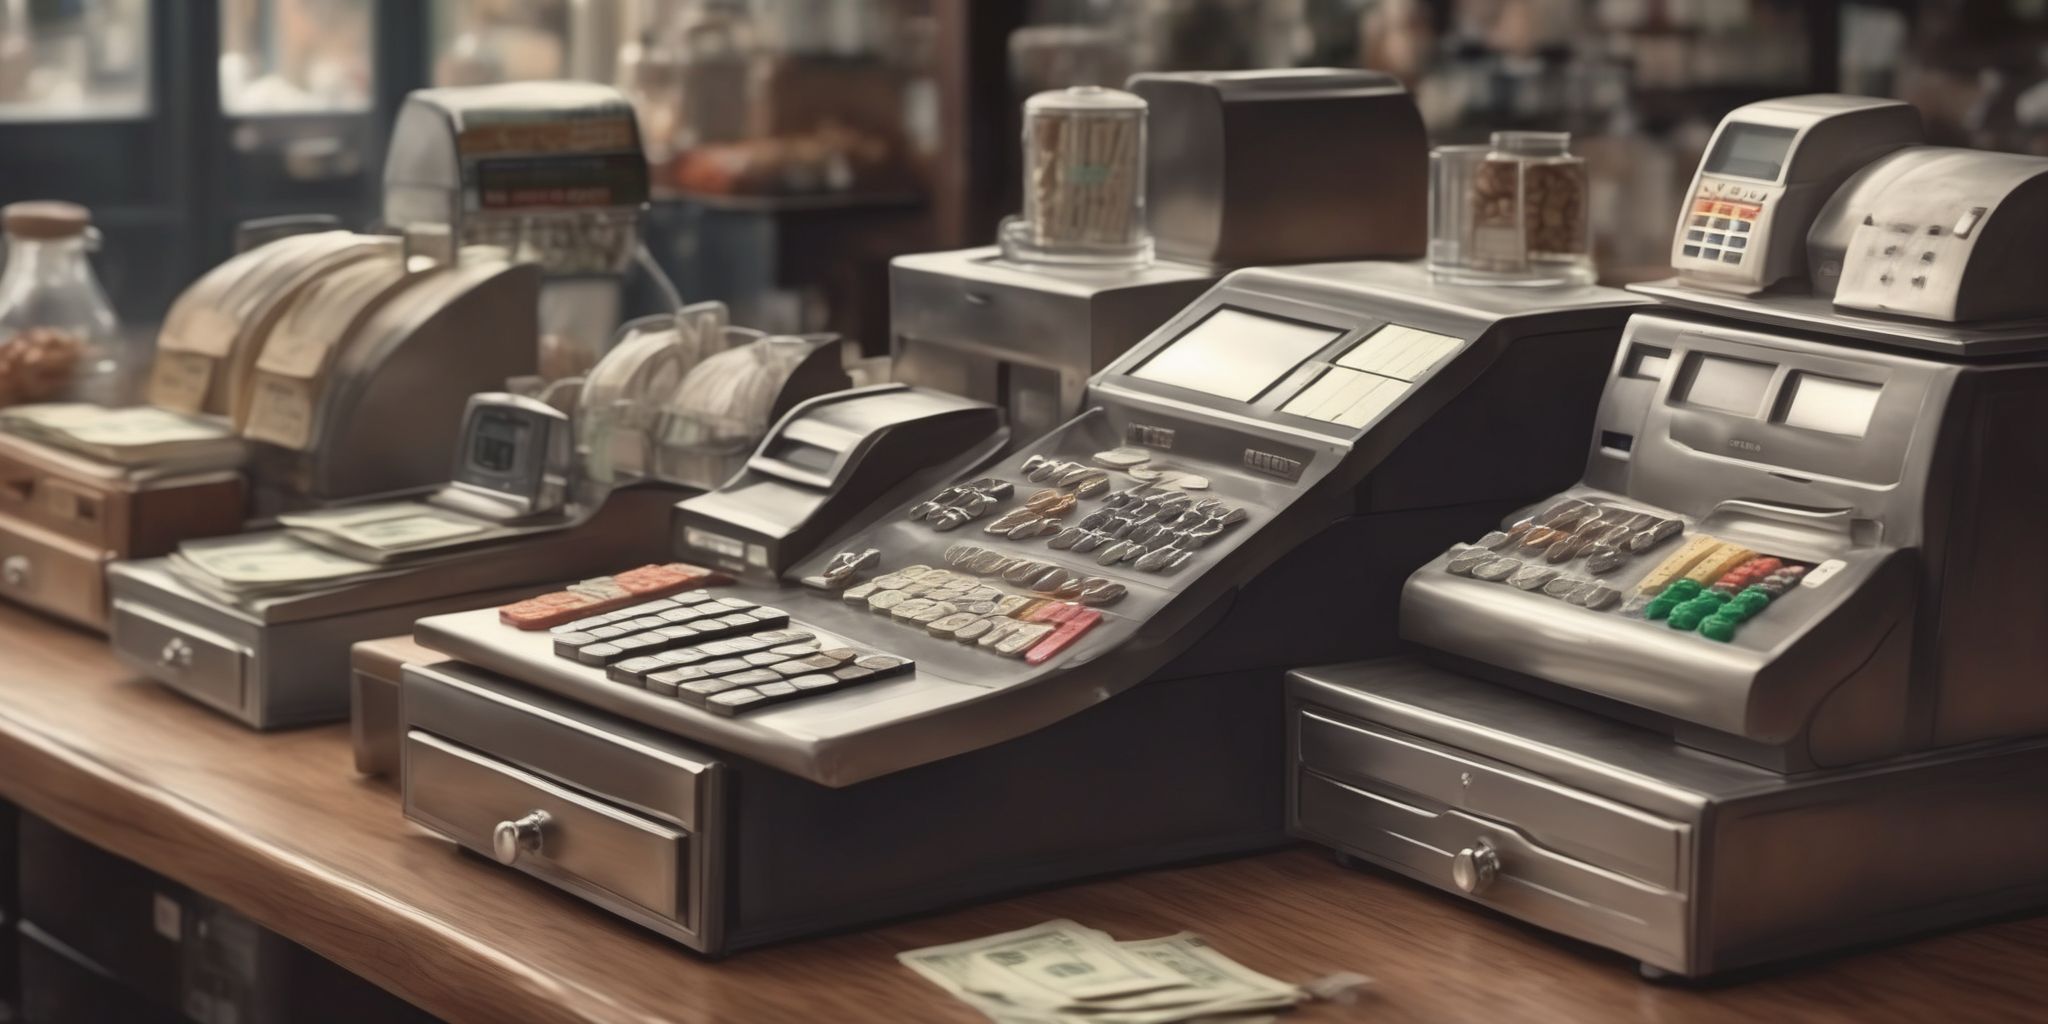 Cash register  in realistic, photographic style